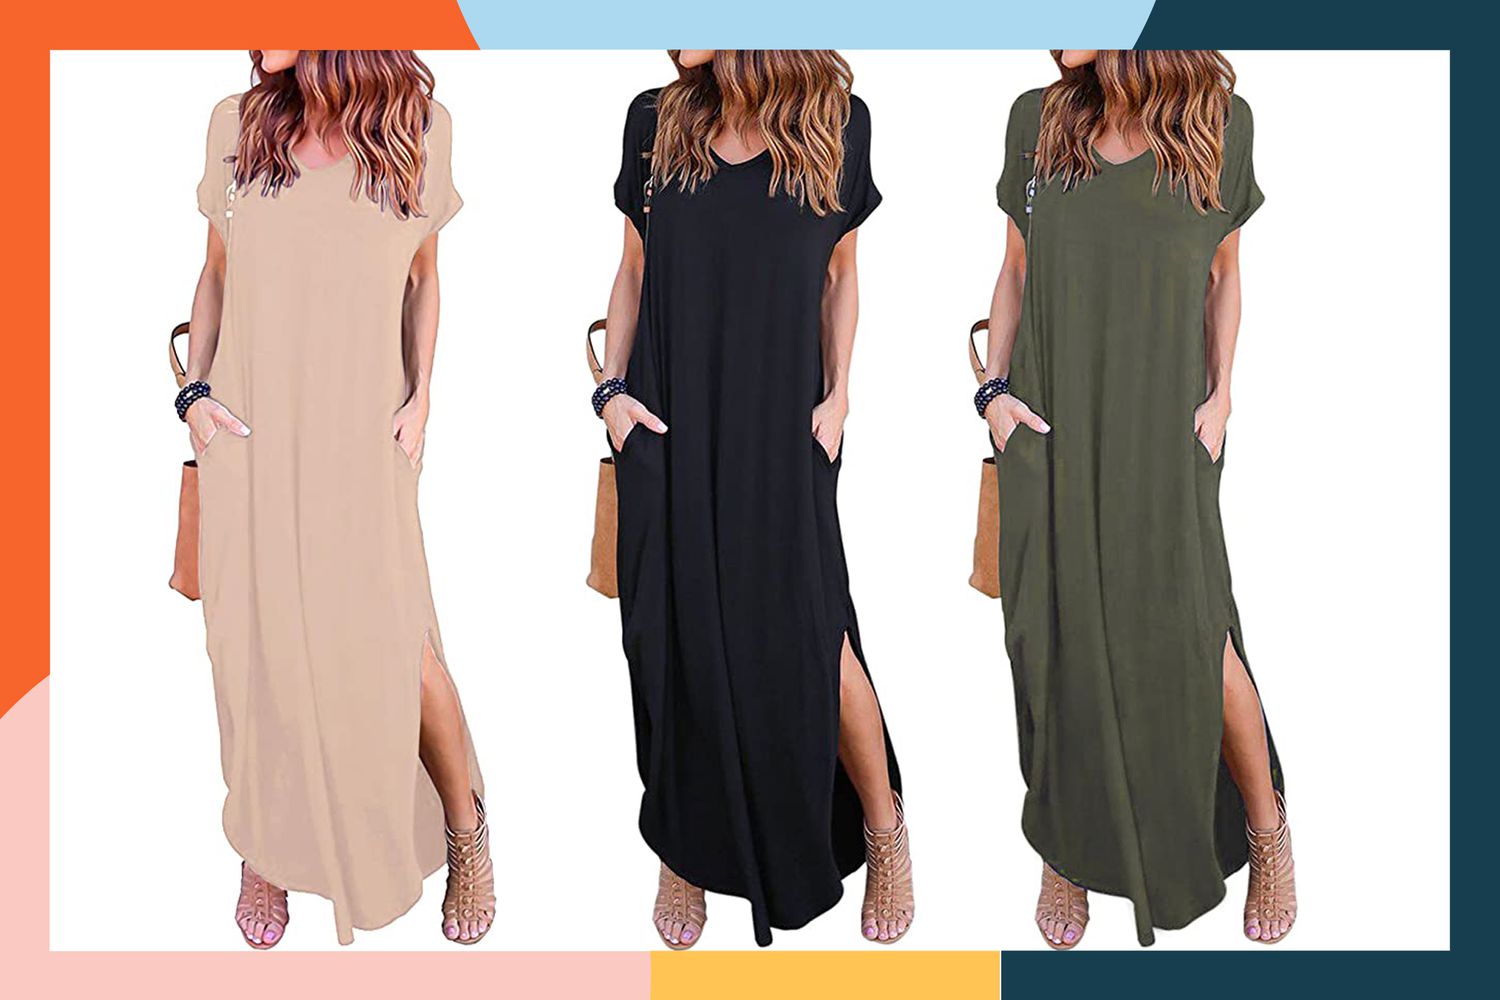 This Maxi Dress with Pockets from Amazon Is Flowy and Comfy | PEOPLE.com